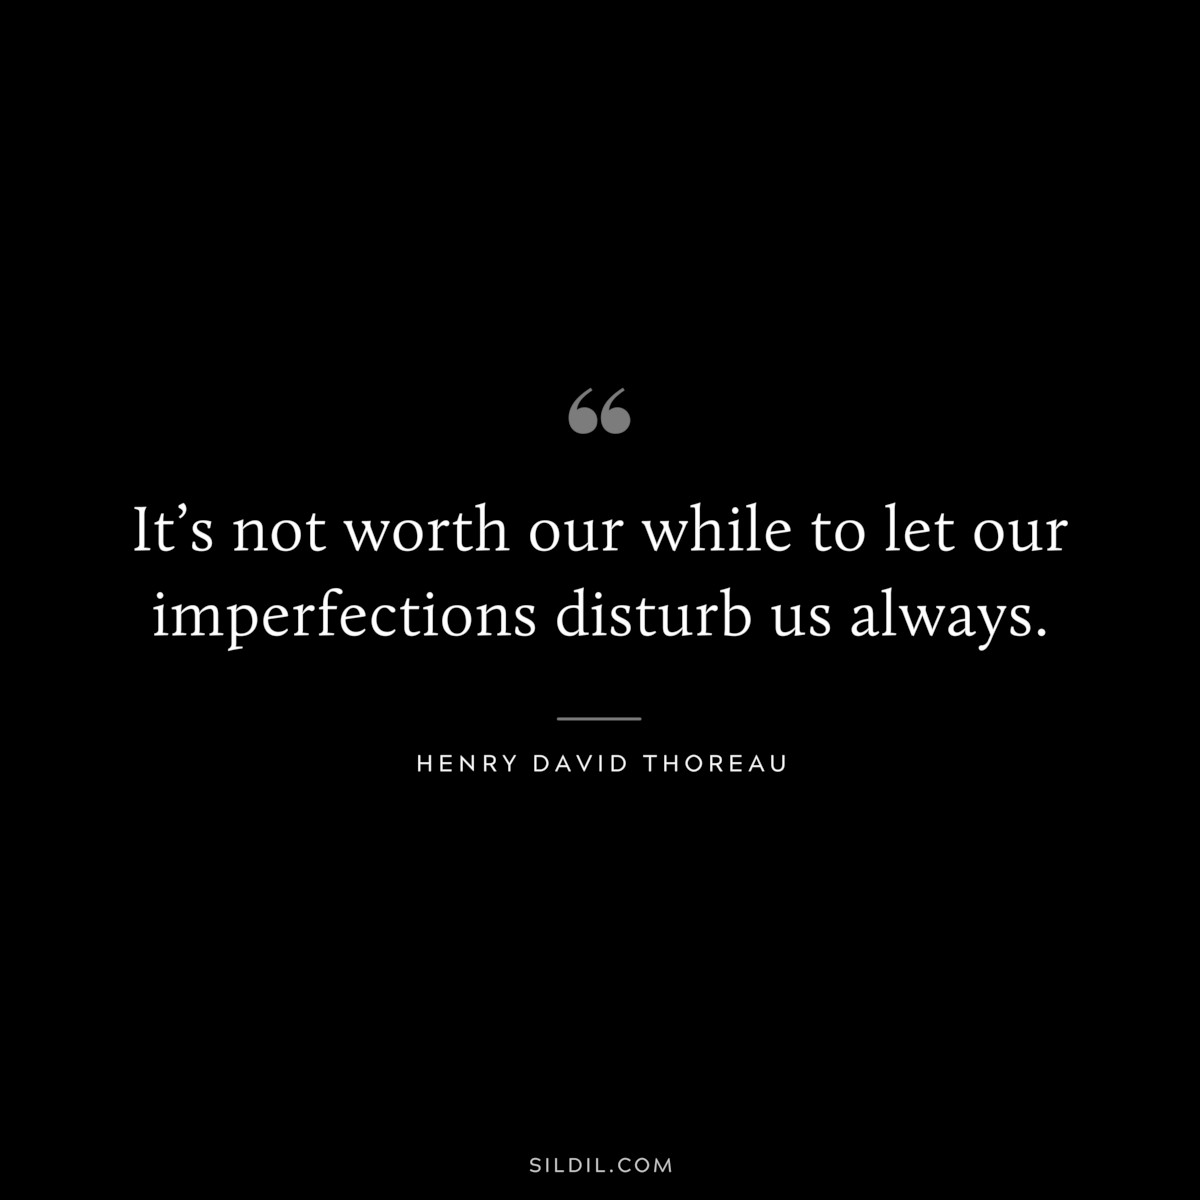 It’s not worth our while to let our imperfections disturb us always. — Henry David Thoreau